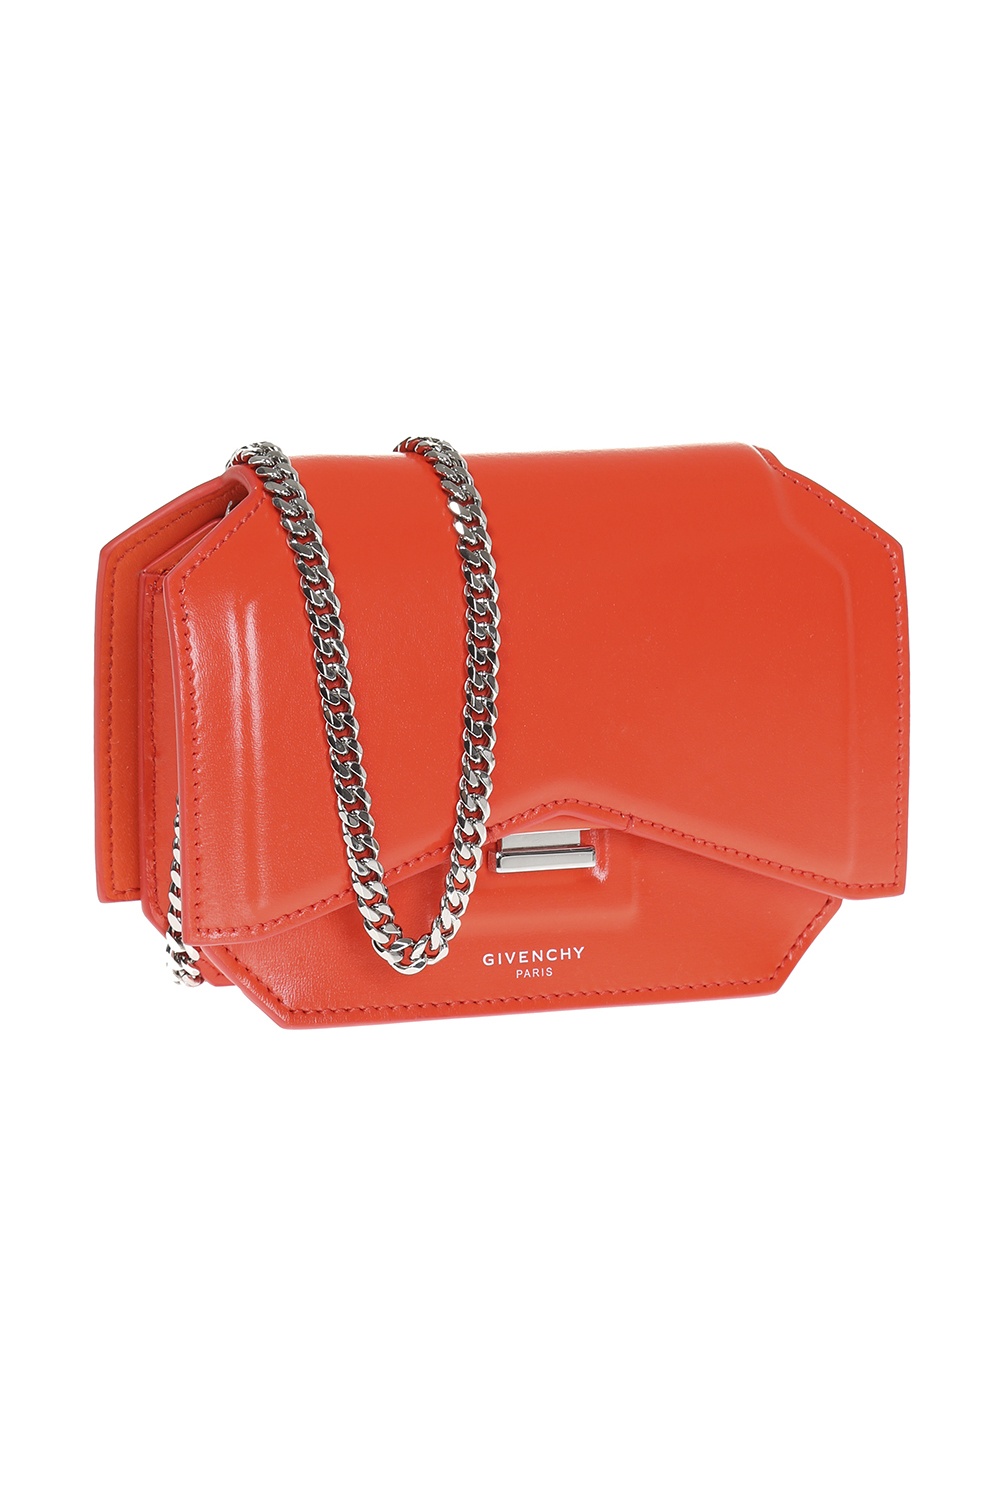 givenchy bow cut chain wallet